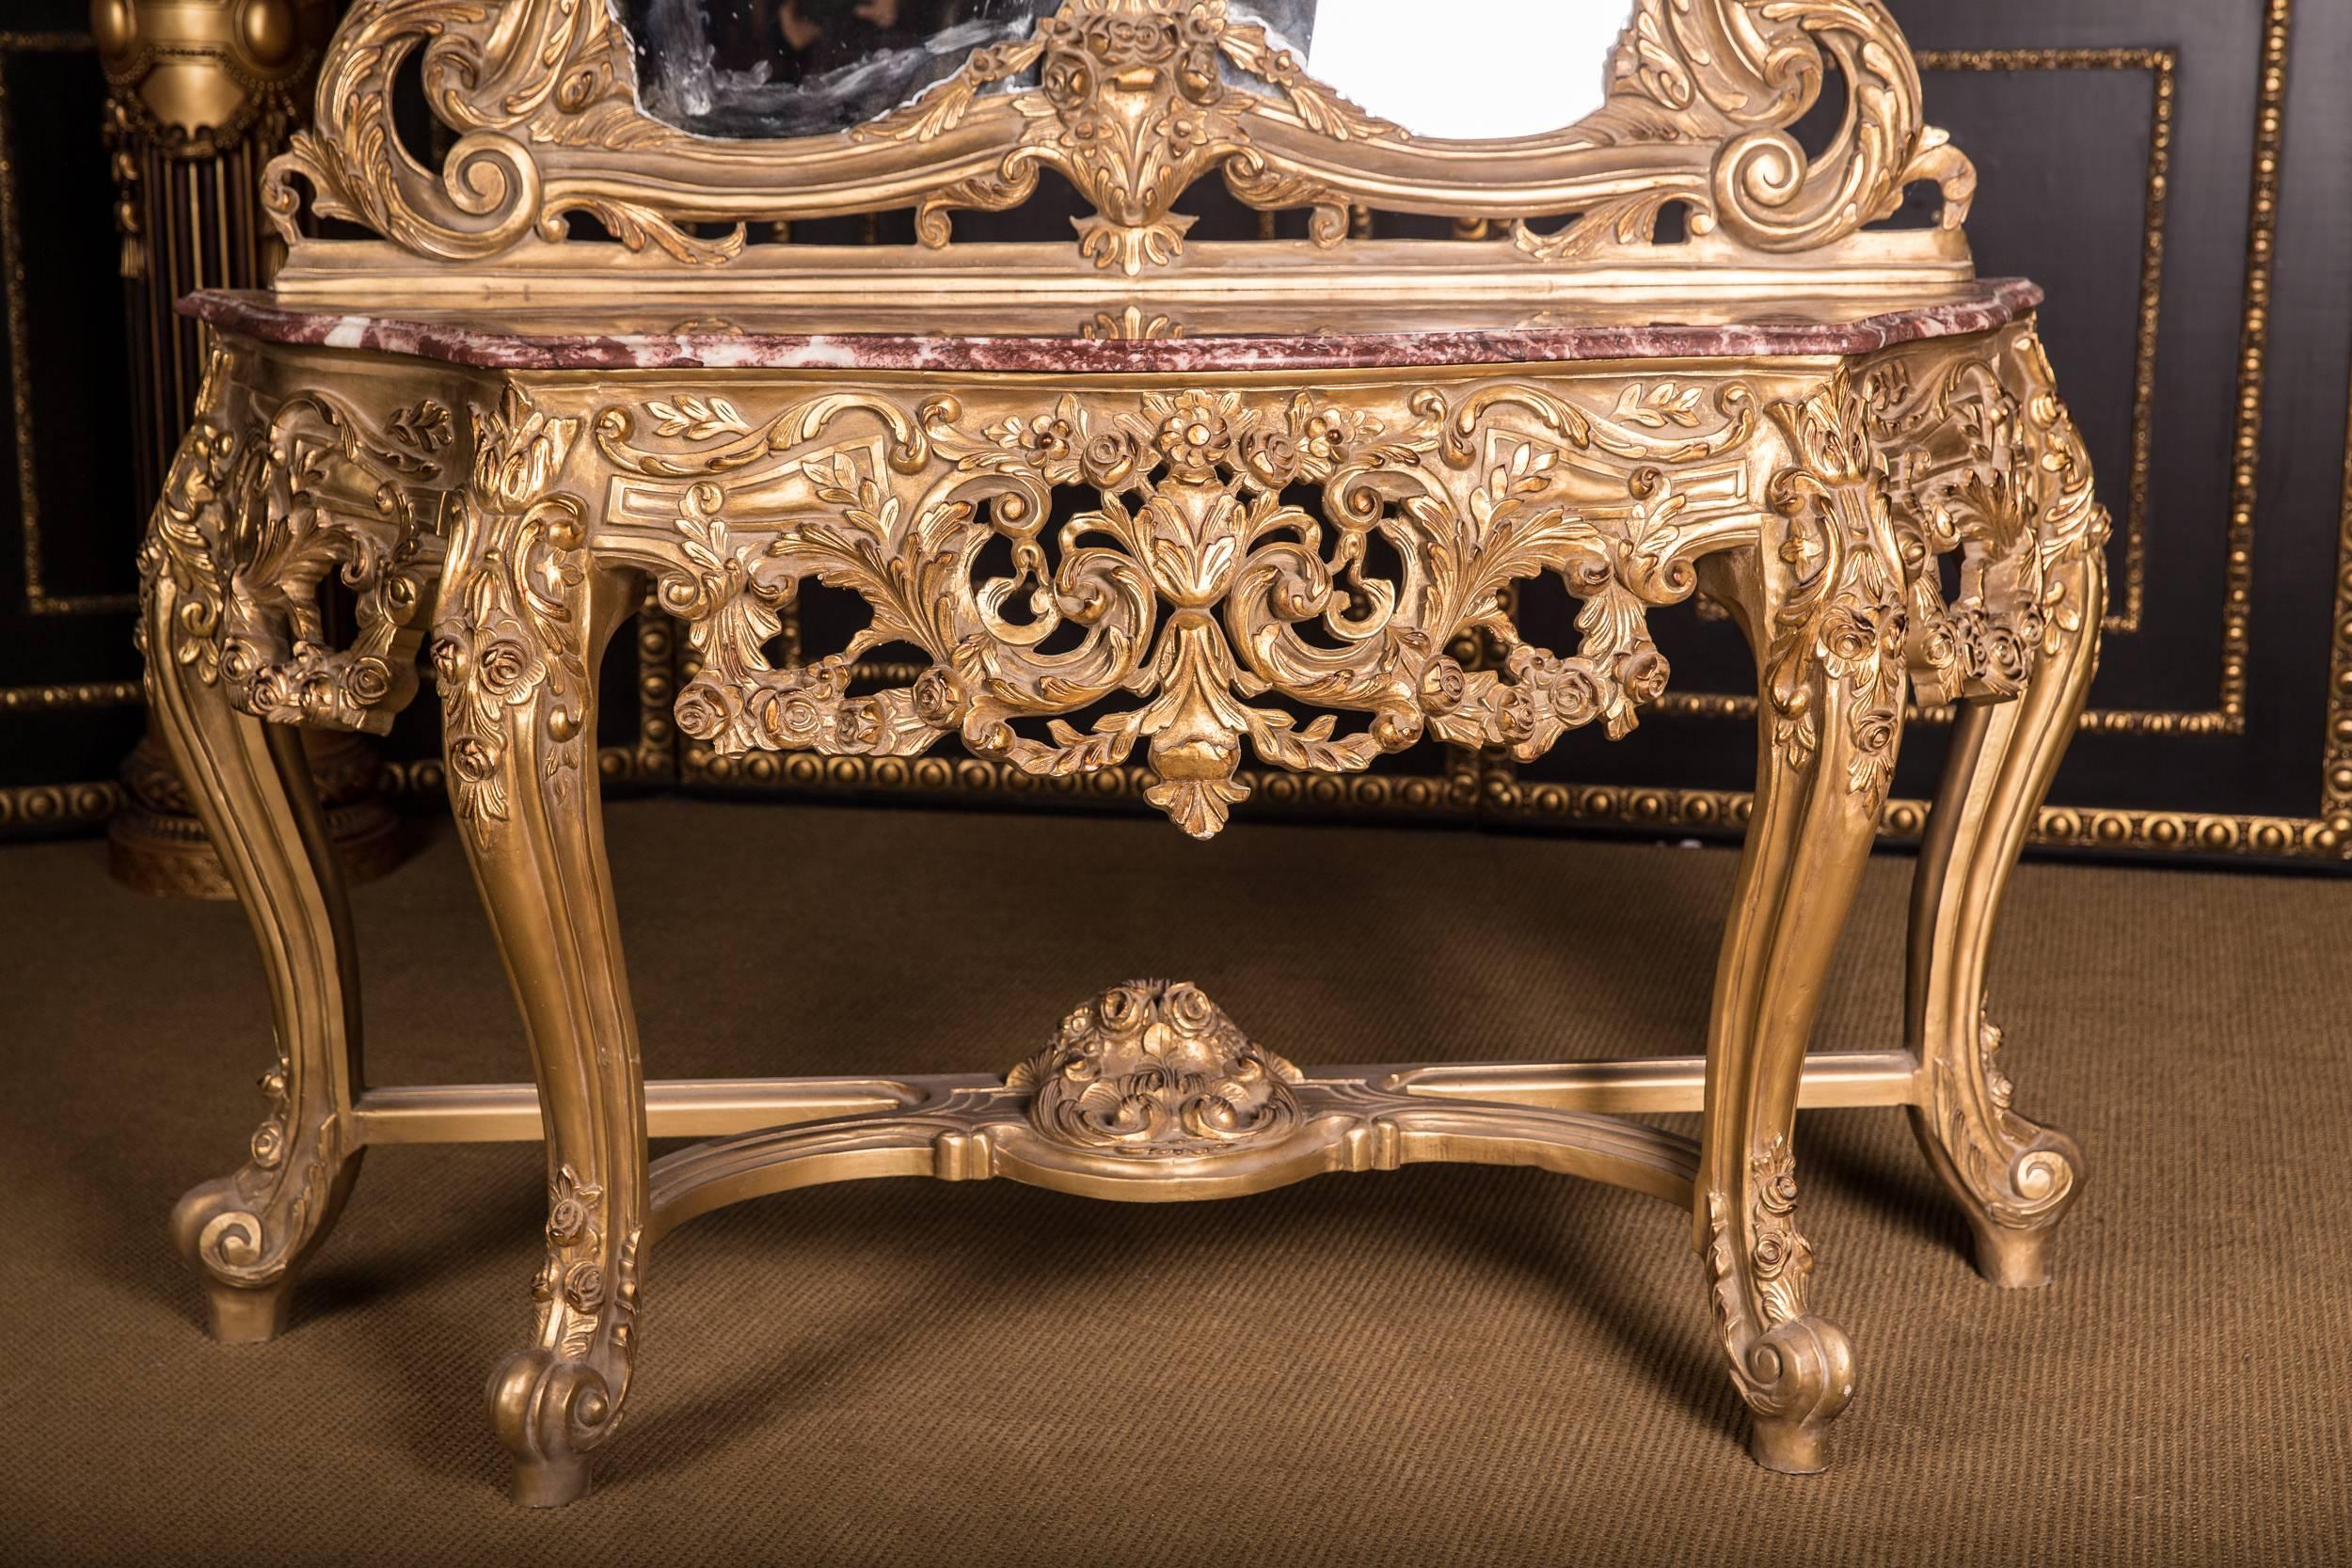 Solid beechwood, finely carved and set. On short obliquely curled volute-like curly feet. Three-sided scalloped crowned frame, rich acanthus and Rocailleschnitzereien. Overhanging marble slab. On top of scrolled volutes and central carving. High